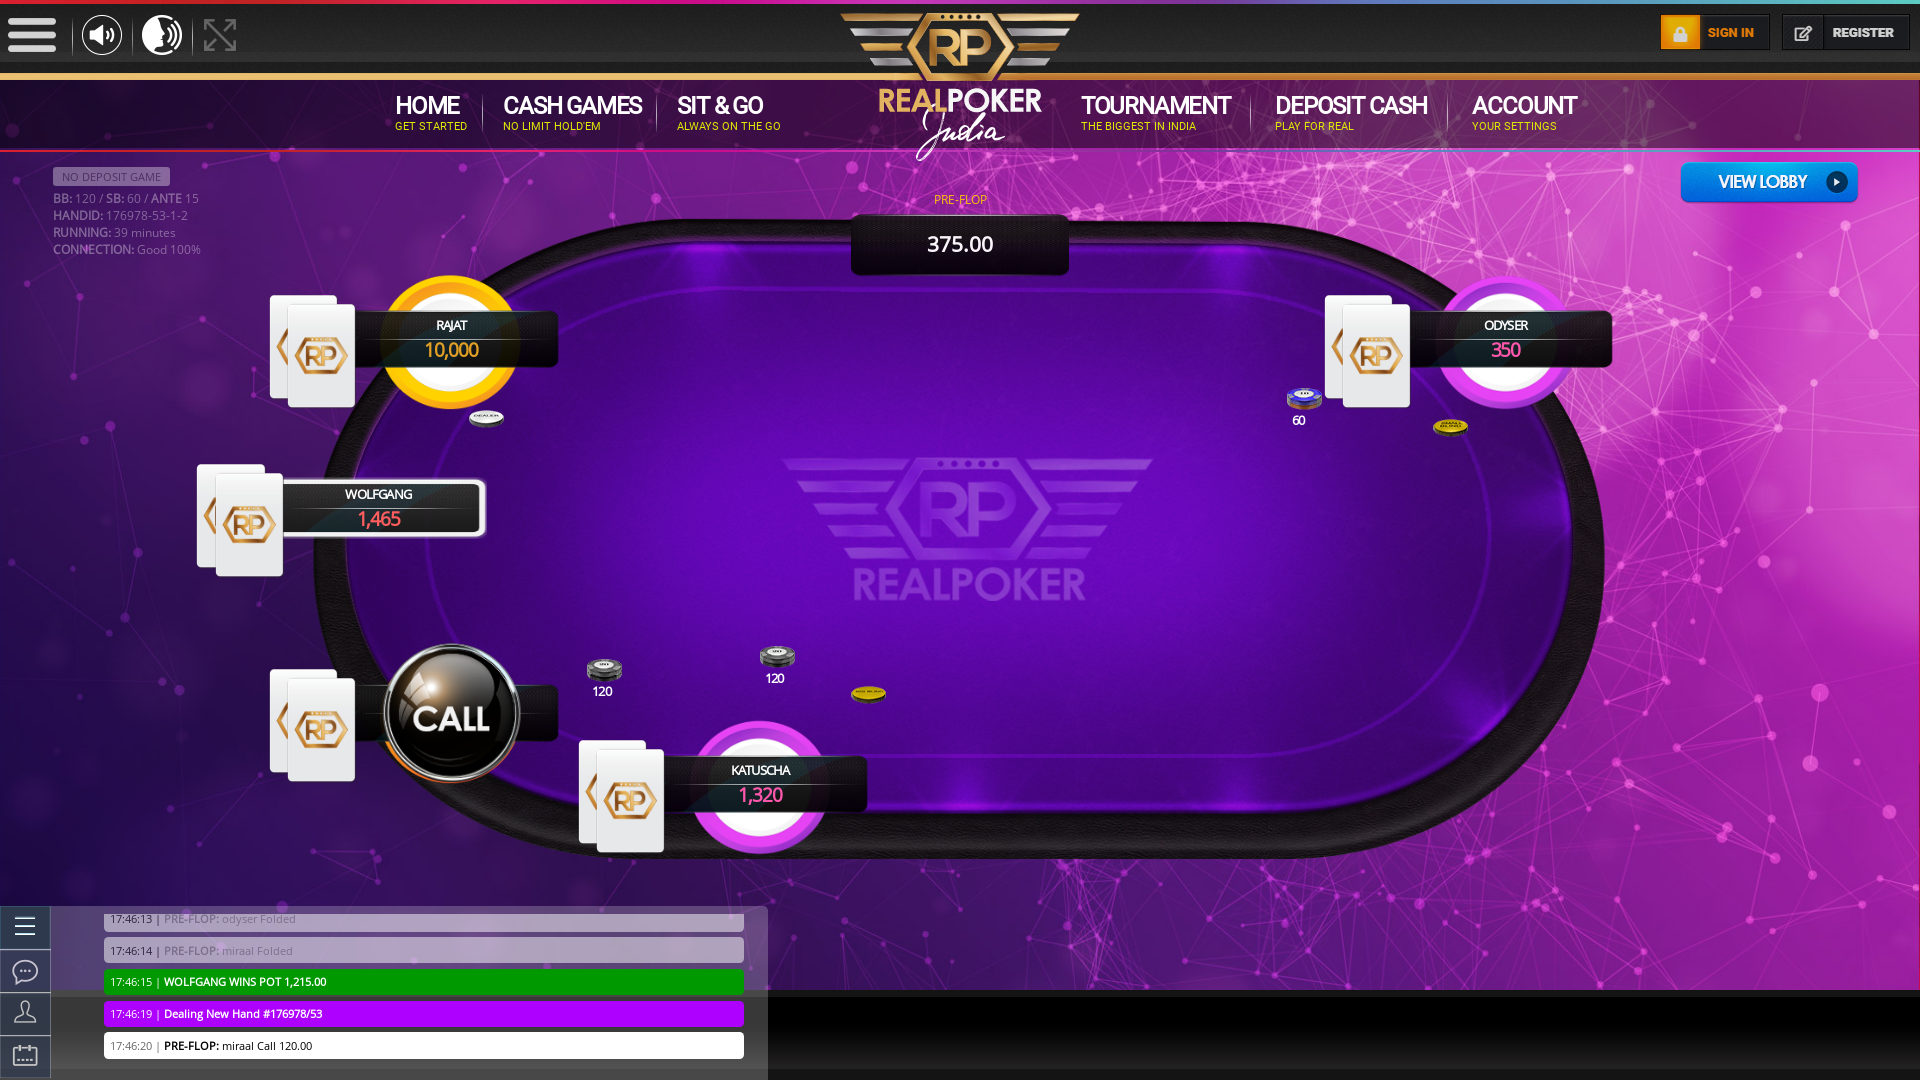 Indian 10 player poker in the 39th minute